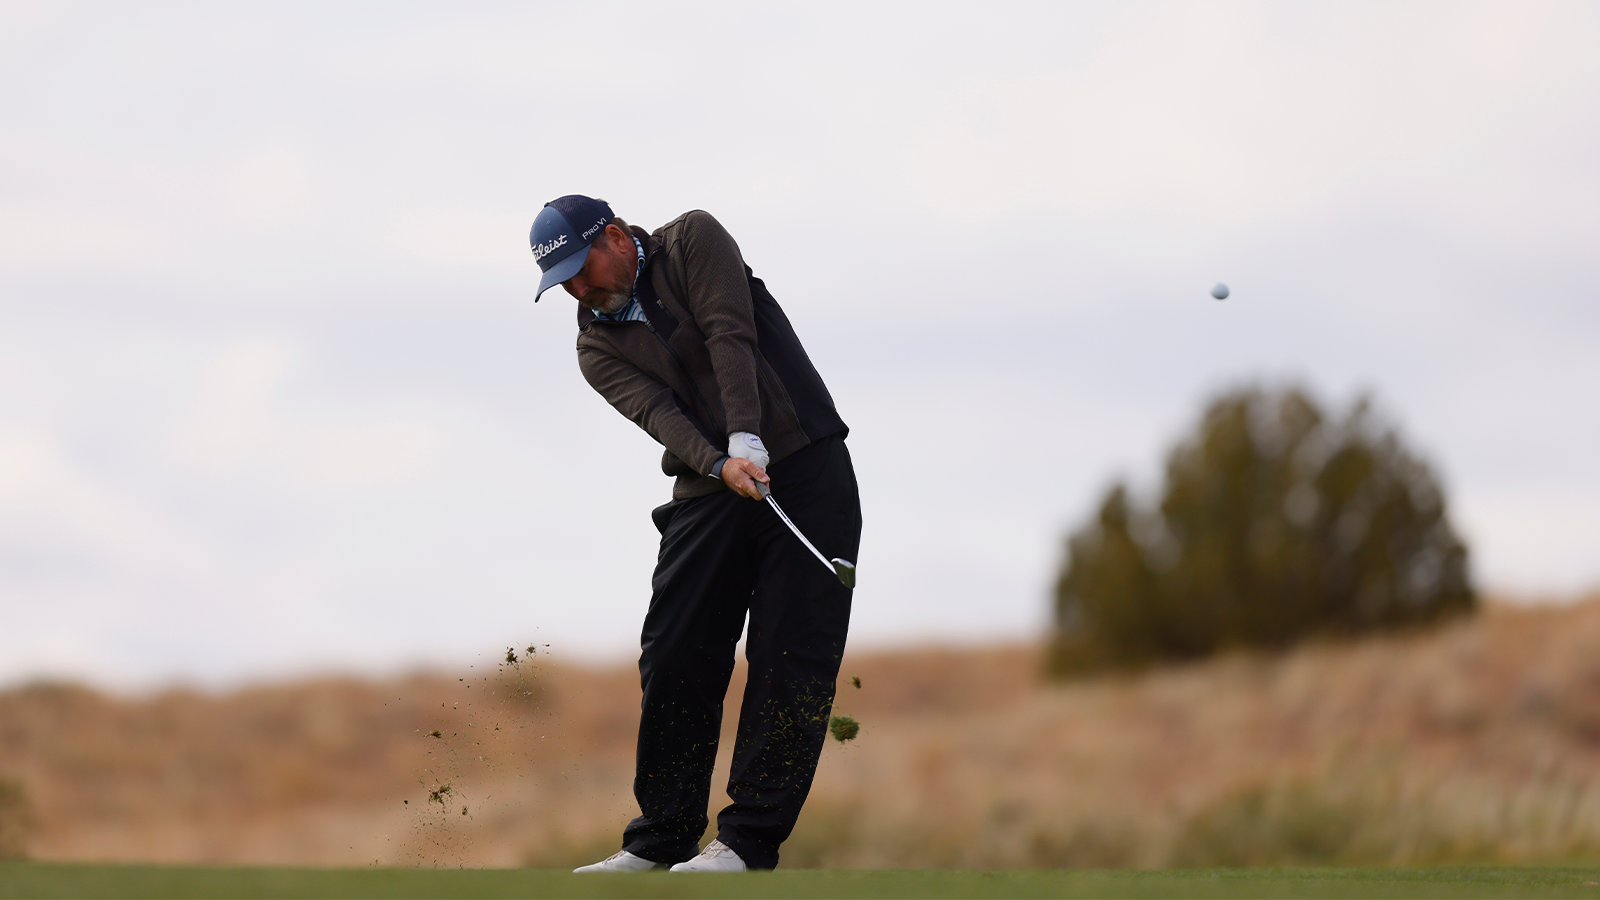 Alan Sorensen hits his shot on the 11th hole during the final round of the 34th Senior PGA Professional Championship at Twin Warriors Golf Club on October 16, 2022 in Santa Ana Pueblo, New Mexico. (Photo by Justin Edmonds/PGA of America)